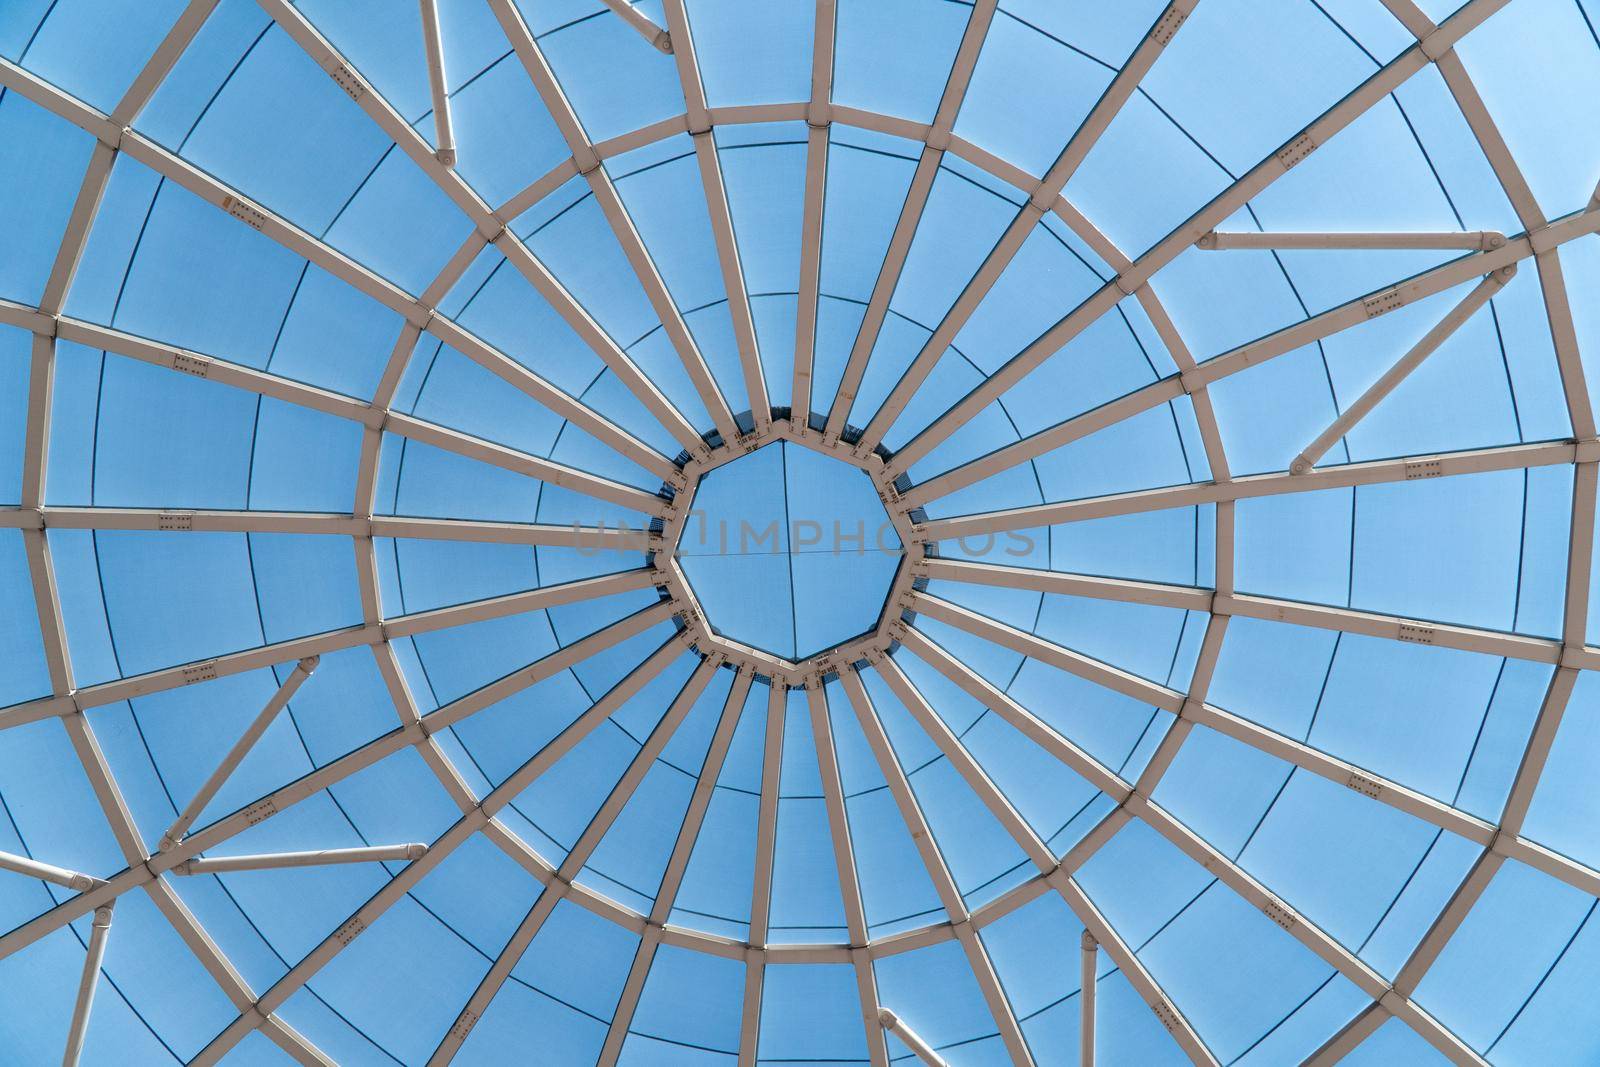 Top of the dome structure - a circle of circular steel beams by voktybre